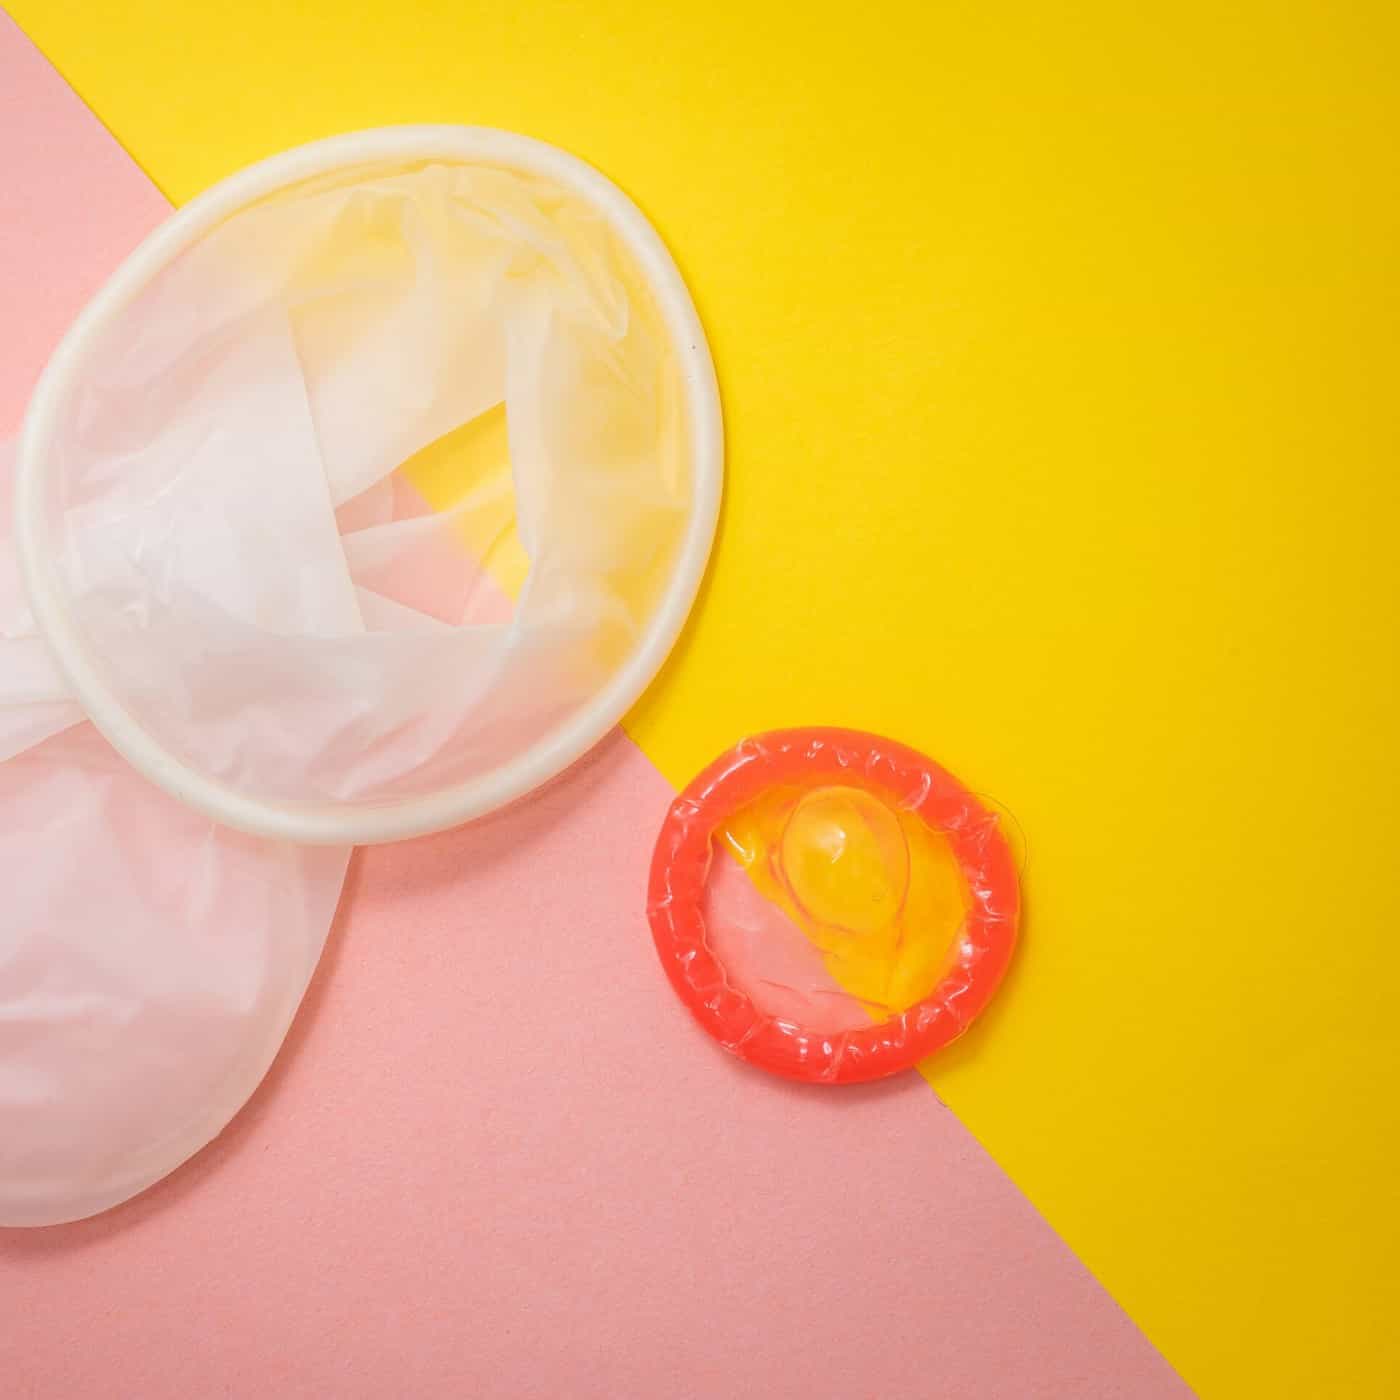 Eighth grade students shown condom video with simulated sex in Planned Parenthood endorsed program